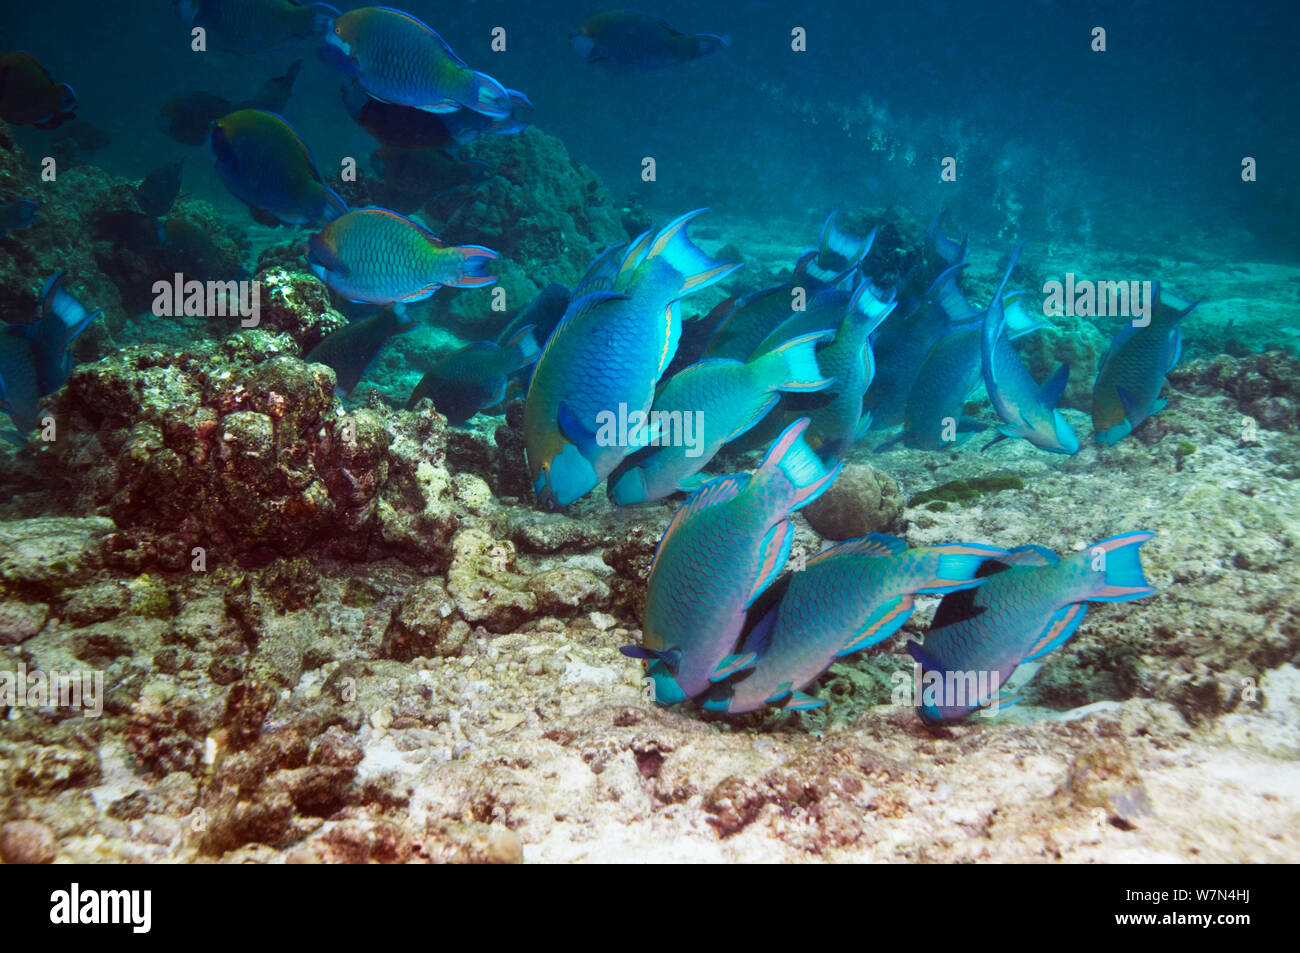 Greenthroat or Singapore parrotfish (Scarus prasiognathus), large school of terminal males grazing on algae covered coral rubble on sandy bottom, Andaman Sea, Thailand. Stock Photo